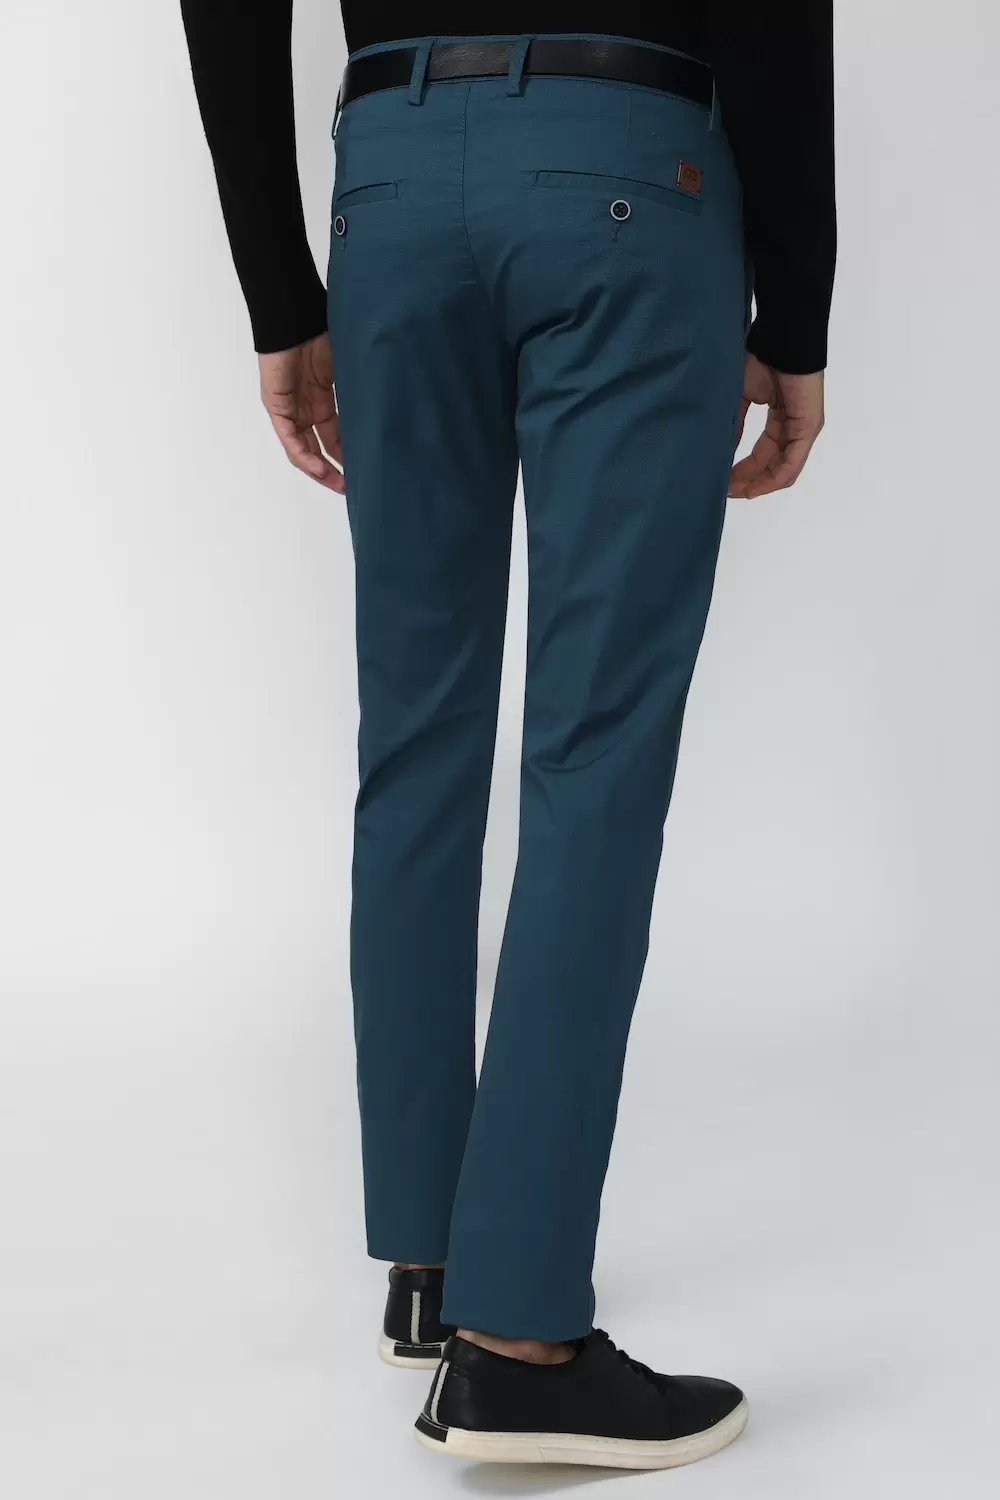 Buy Peter England Blue Cotton Skinny Fit Chinos for Mens Online @ Tata CLiQ